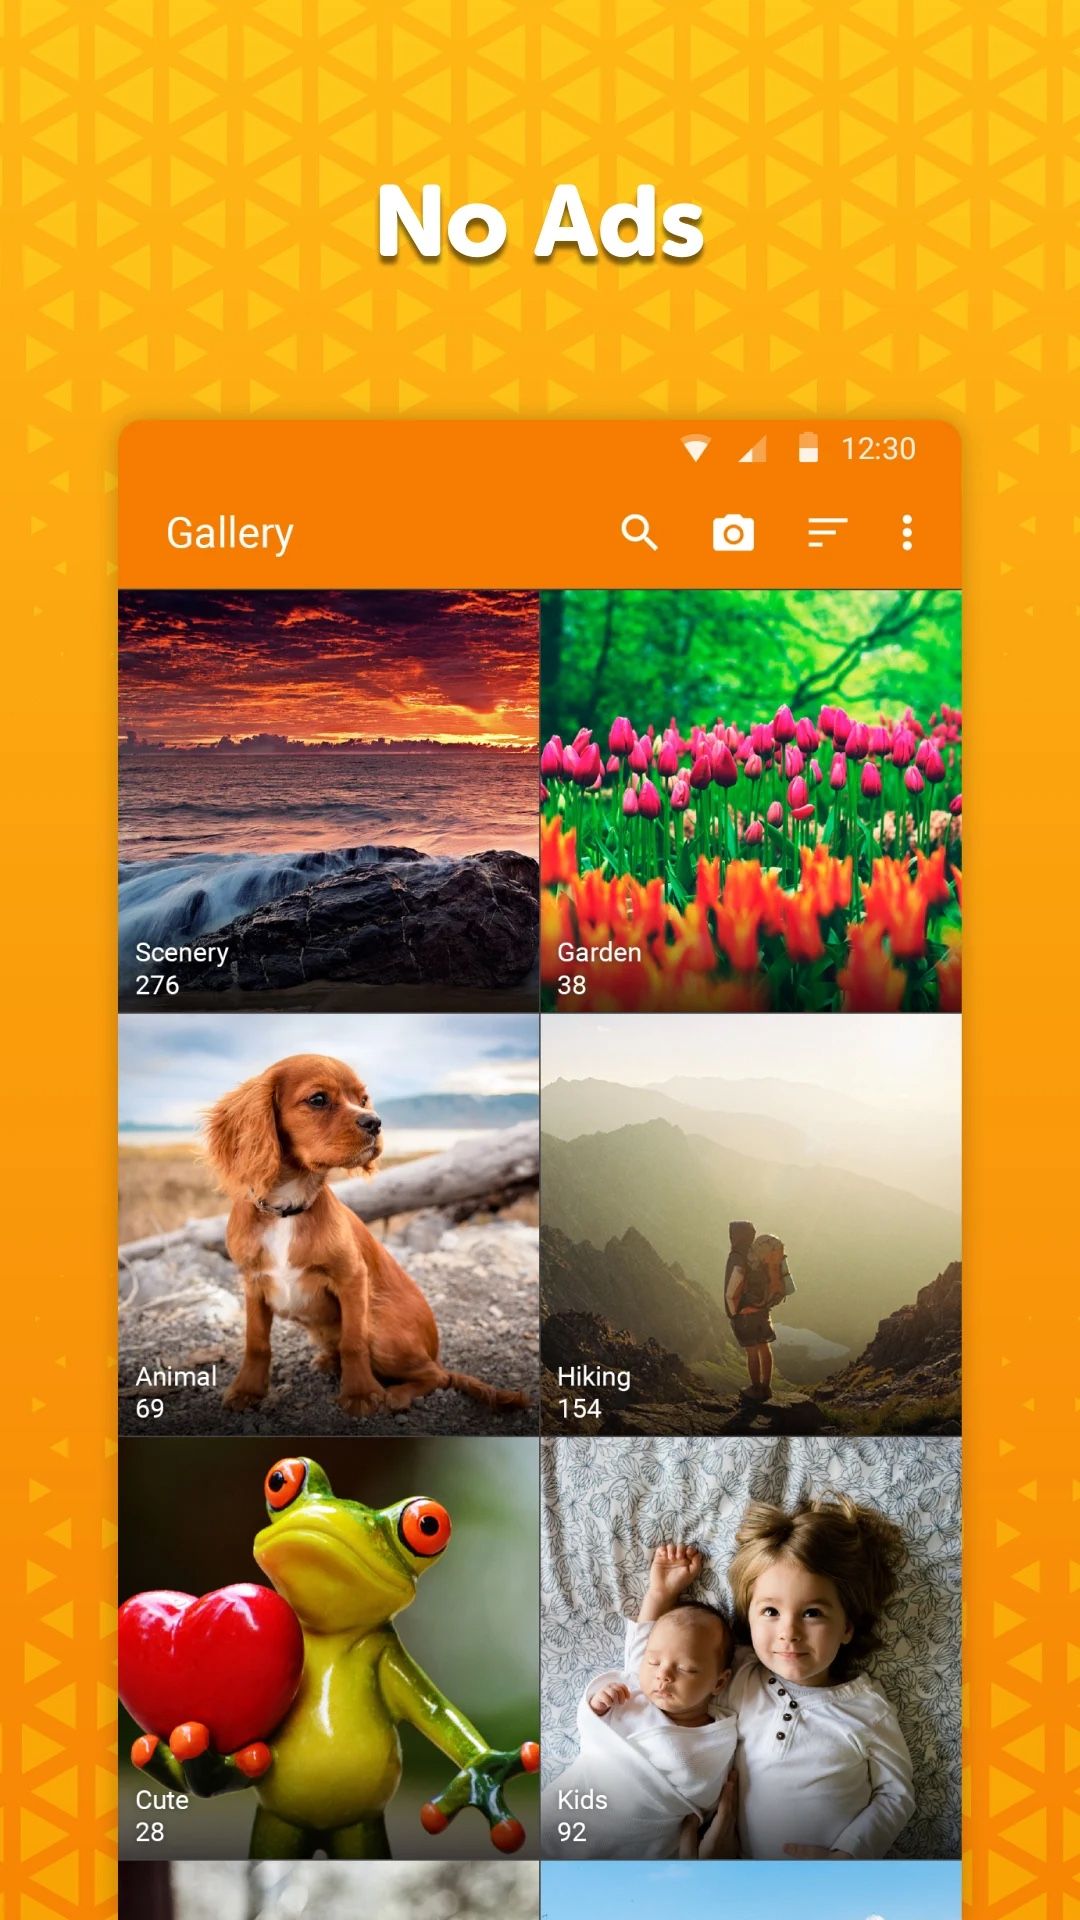 gallery of images on an orange background